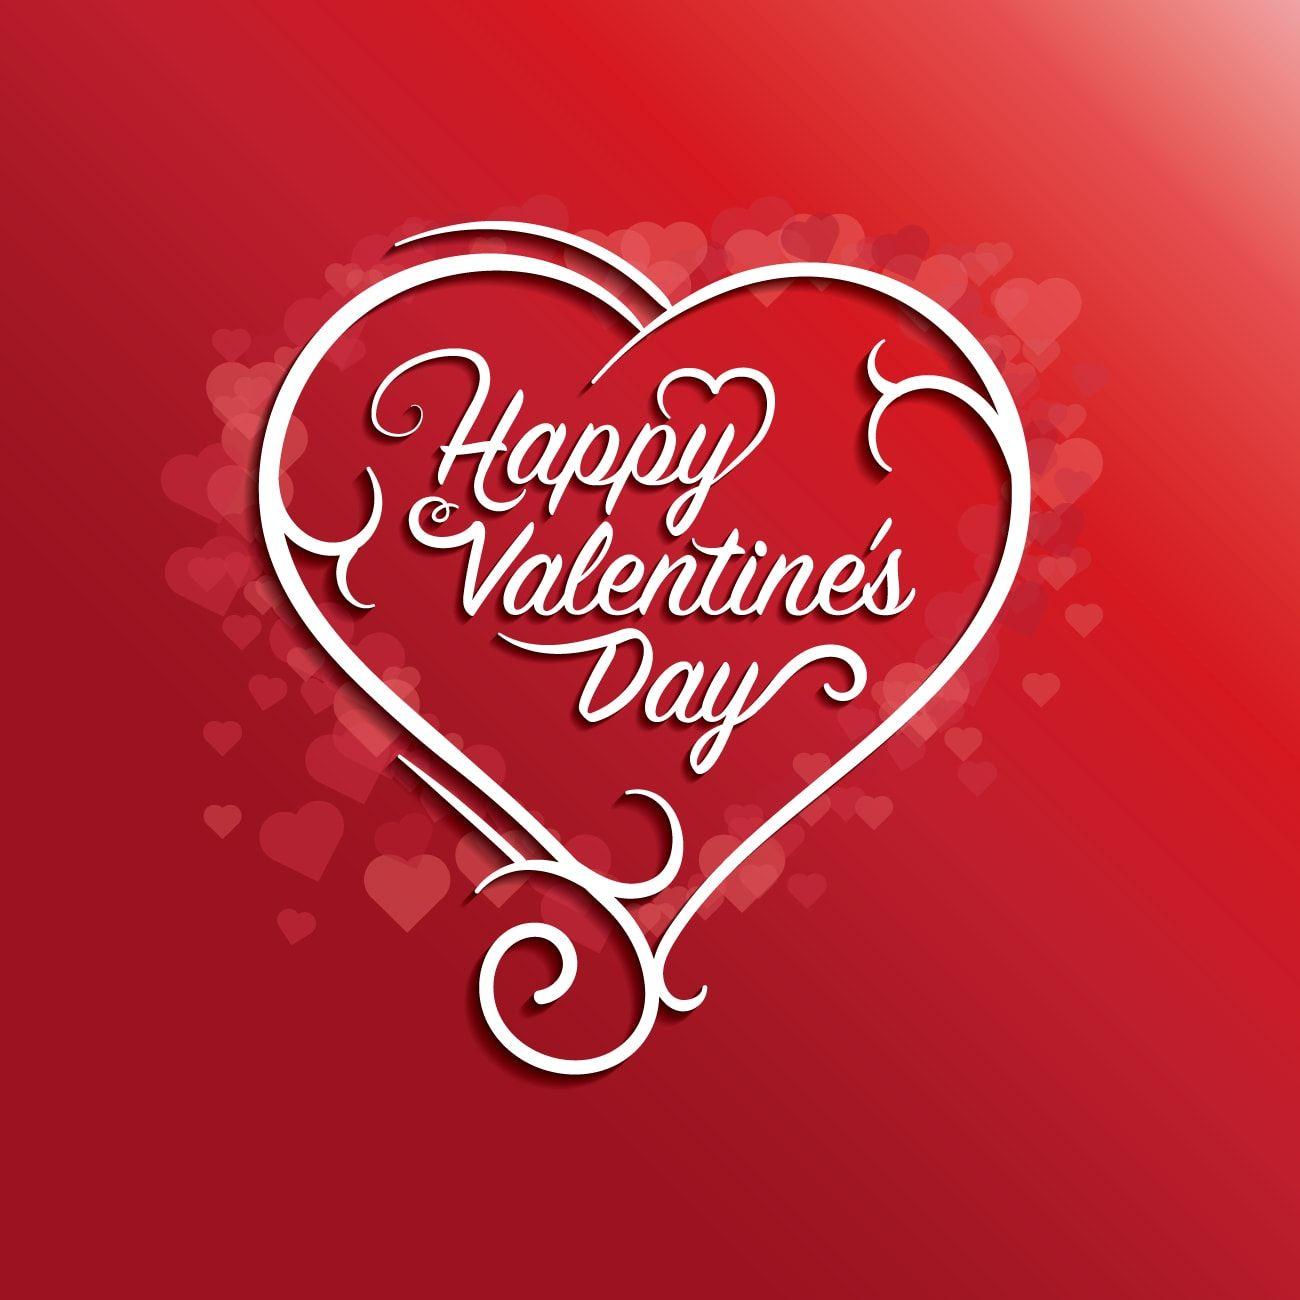 Happy Valentines Day 2017 HD Wallpaper Download. Facebook Cover